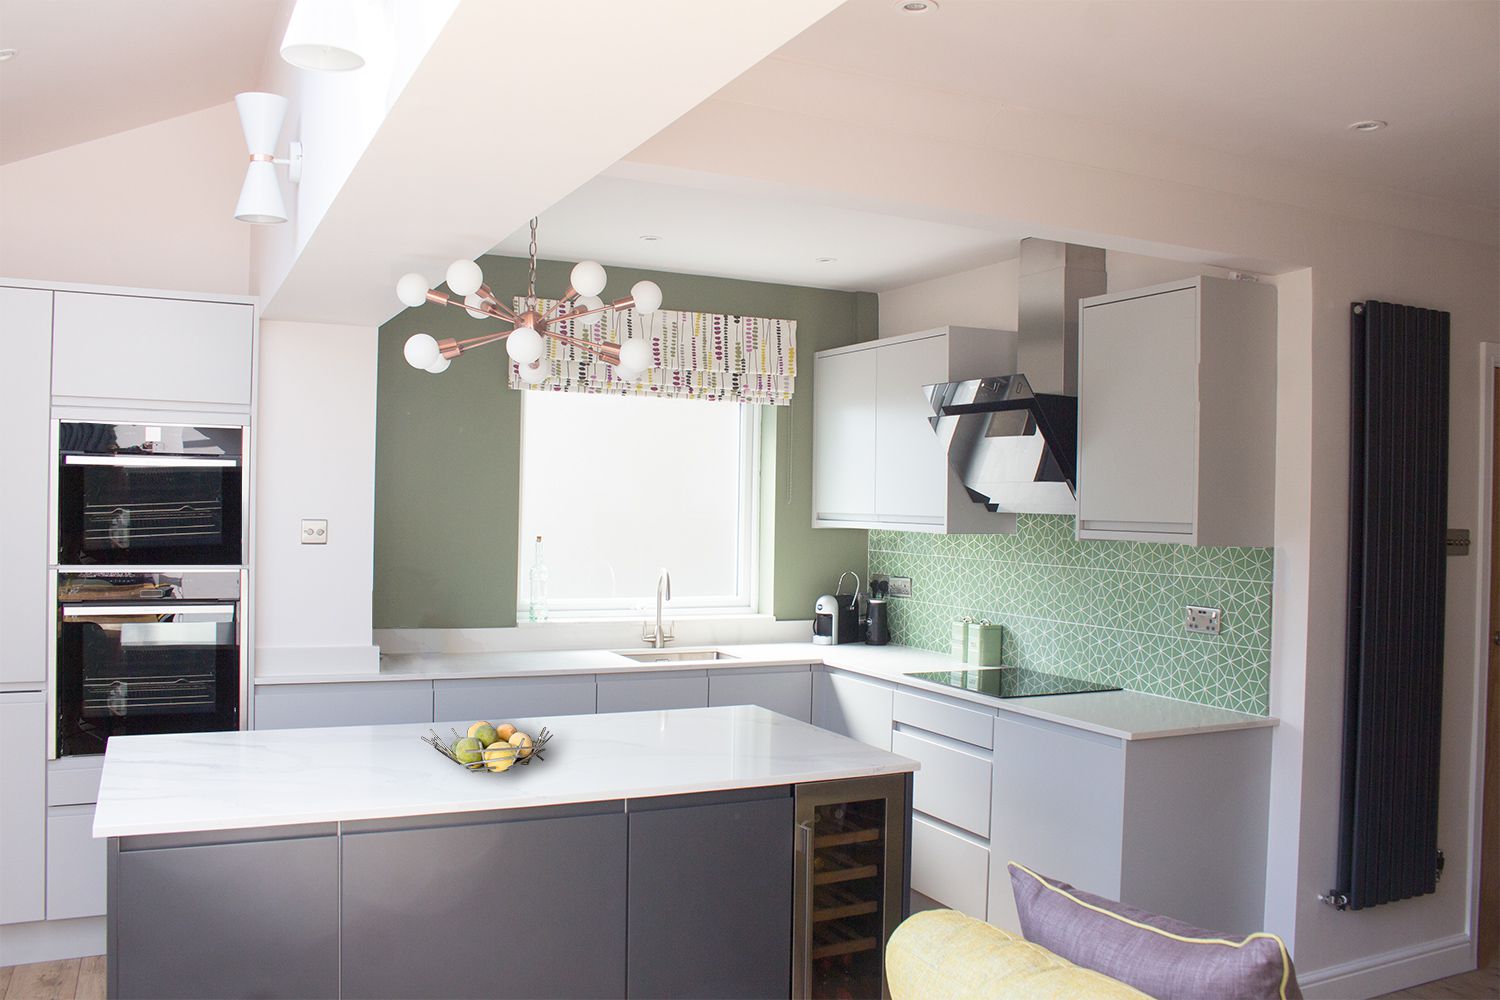 A photo of the kitchen area with light grey cabinets, marble worktops and a funky green geometric tile for the splashback.